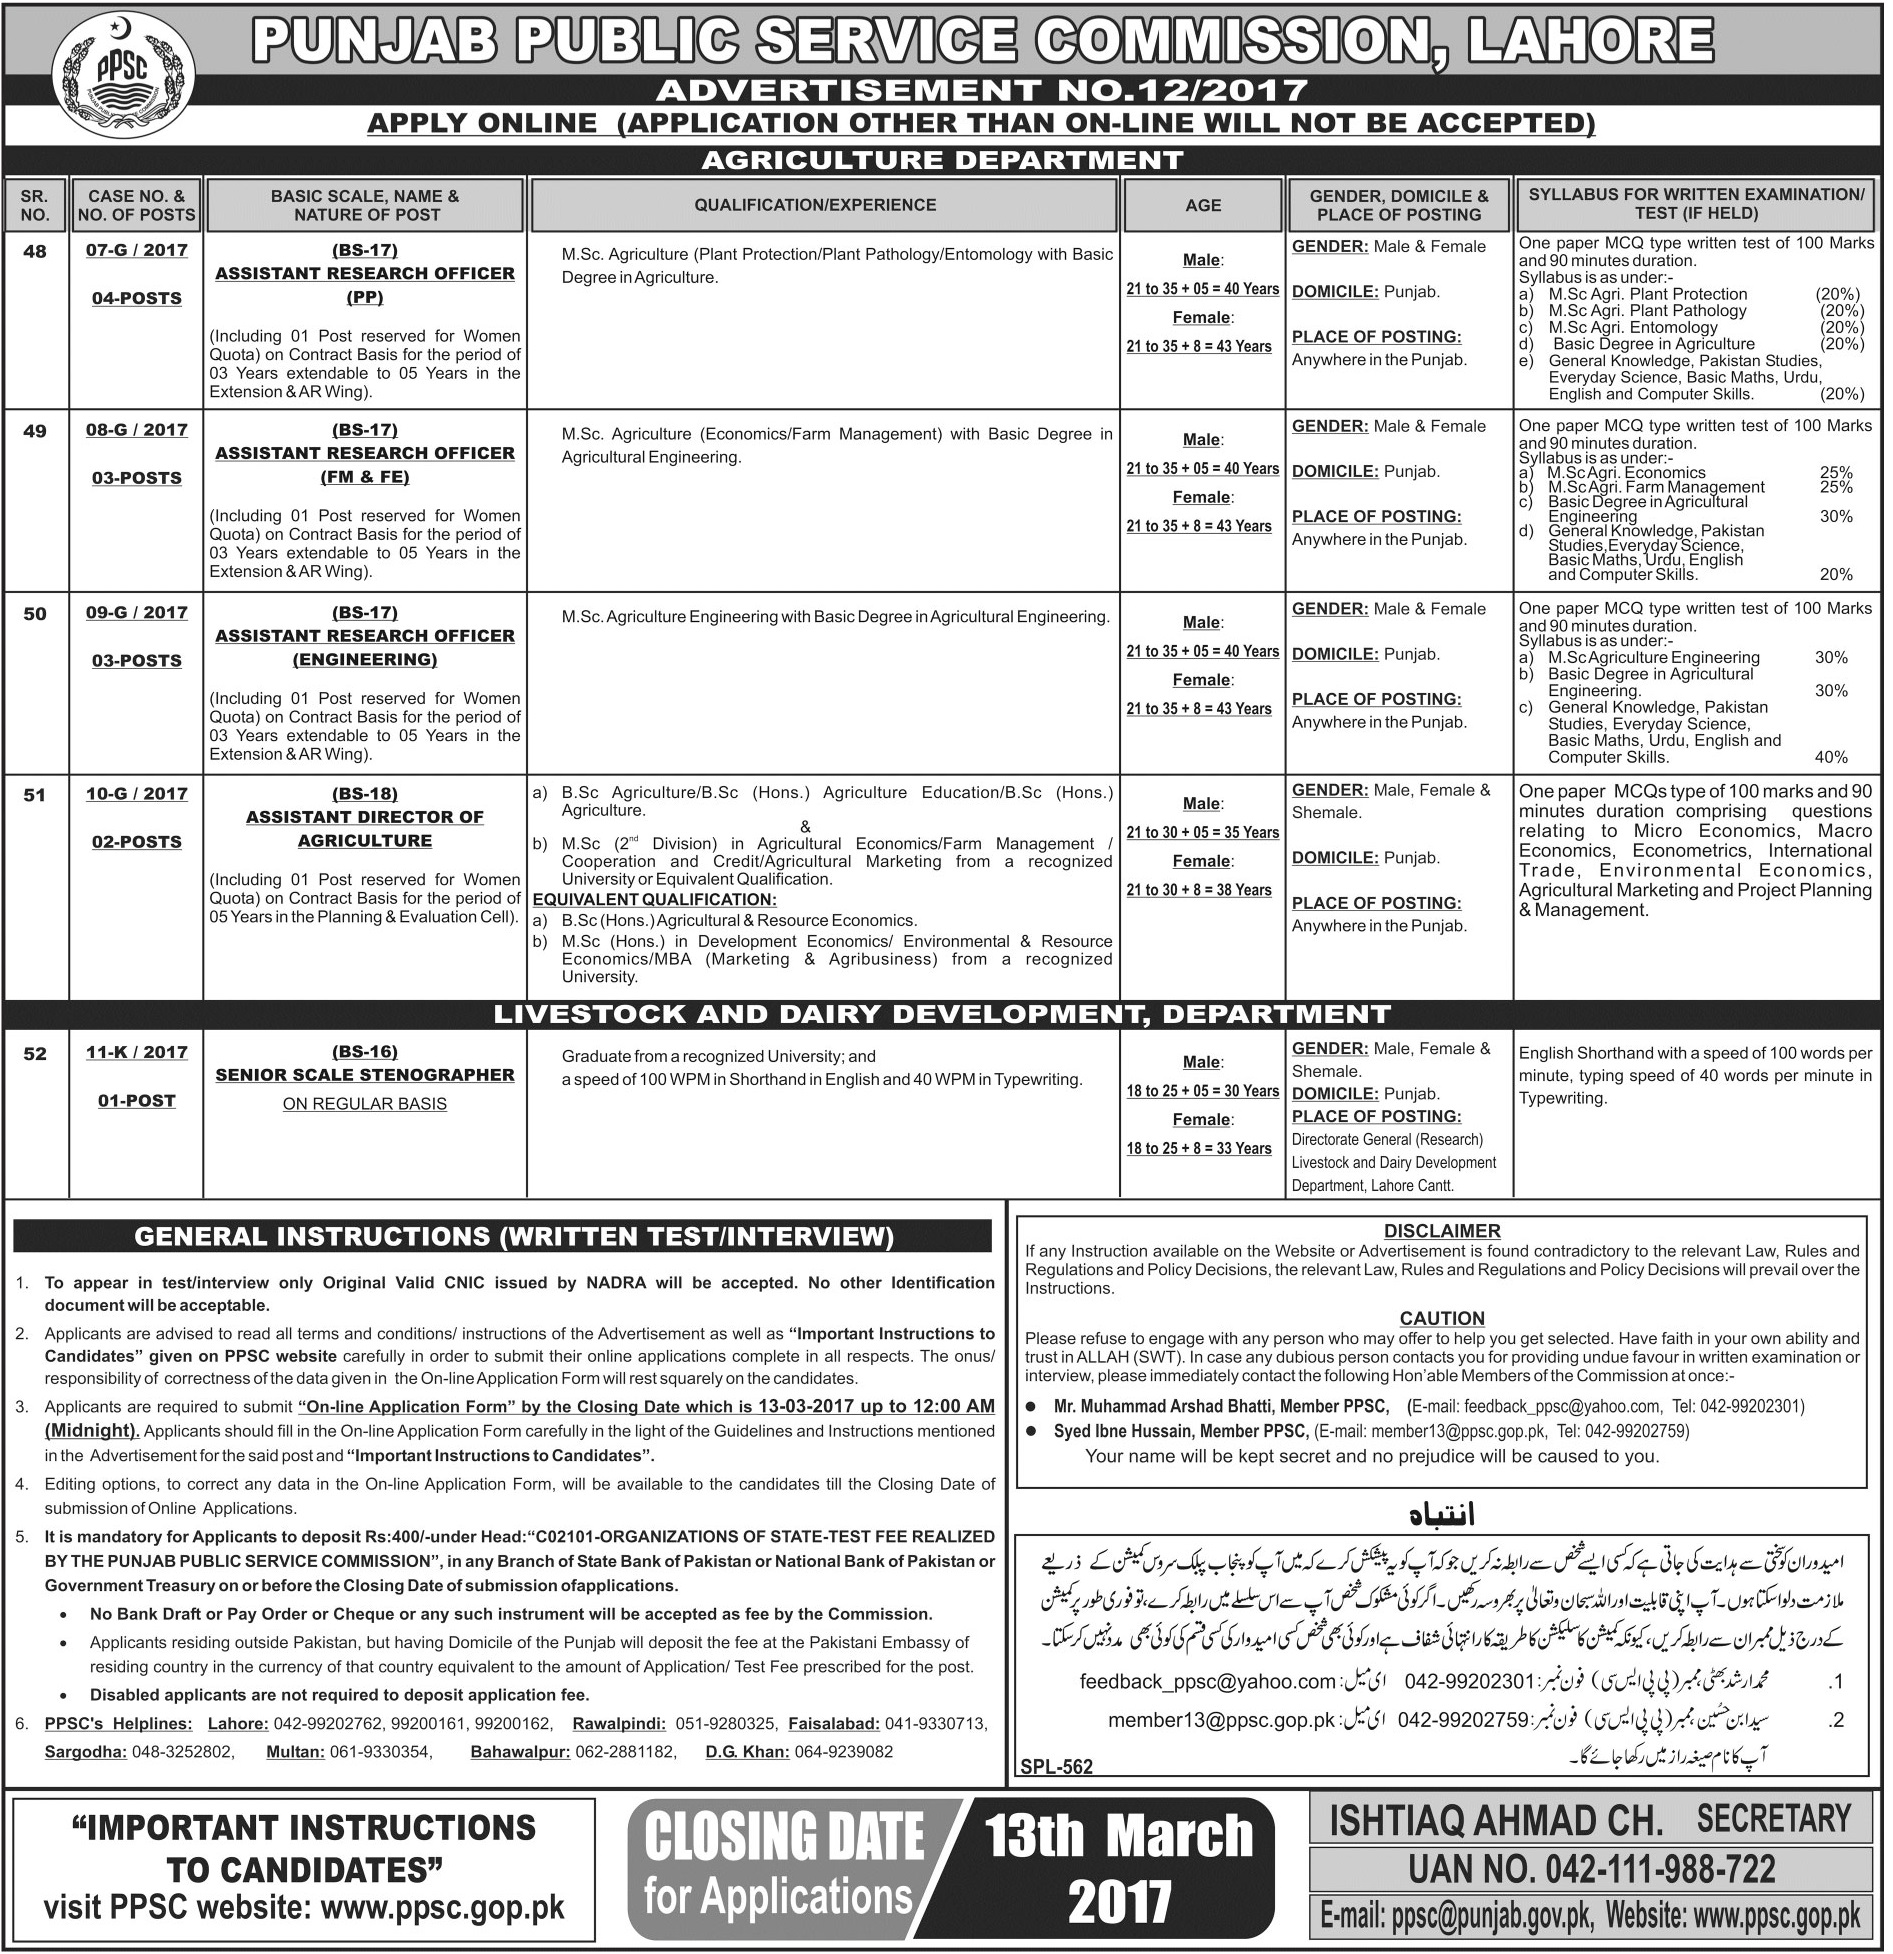 PPSC Jobs 2023 Agriculture, Livestock Dairy Departments Written Test Syllabus MCQs